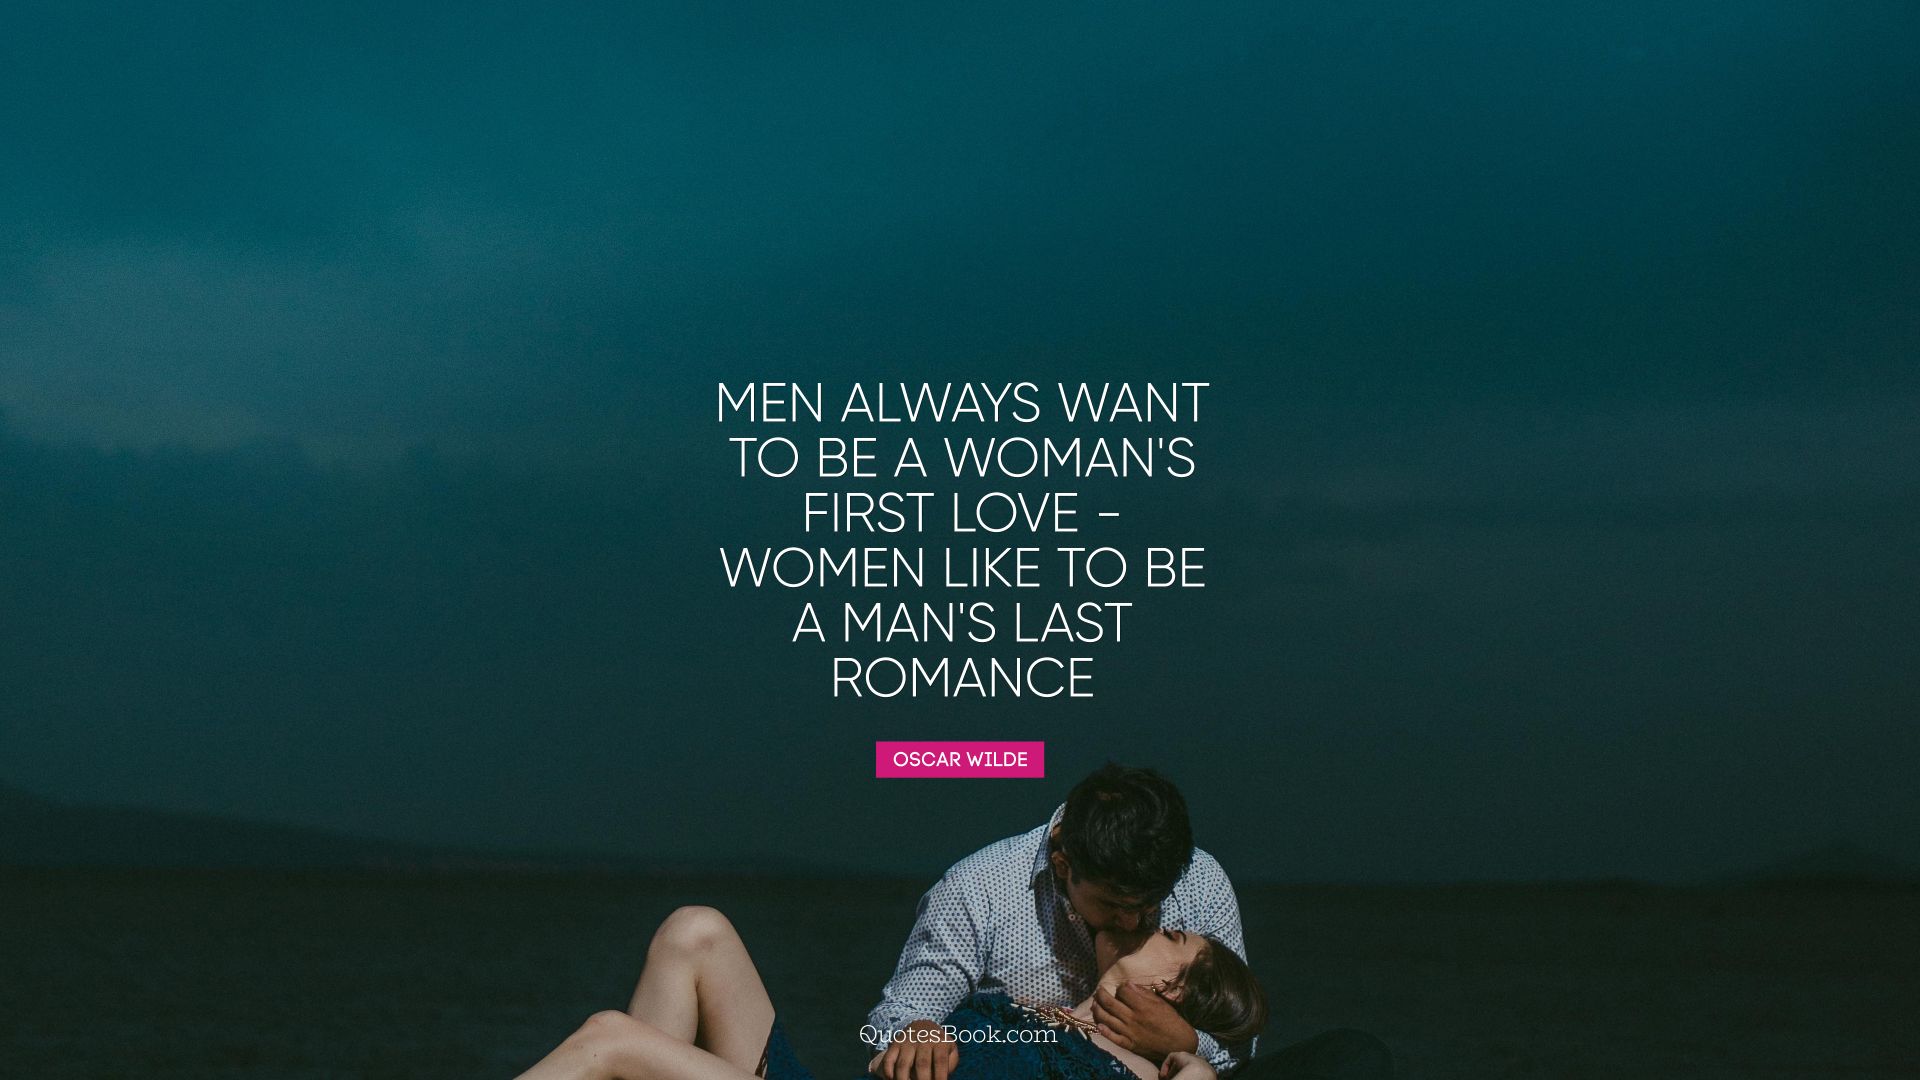 Men always want to be a woman's first love - women like to be a man's last romance. - Quote by Oscar Wilde